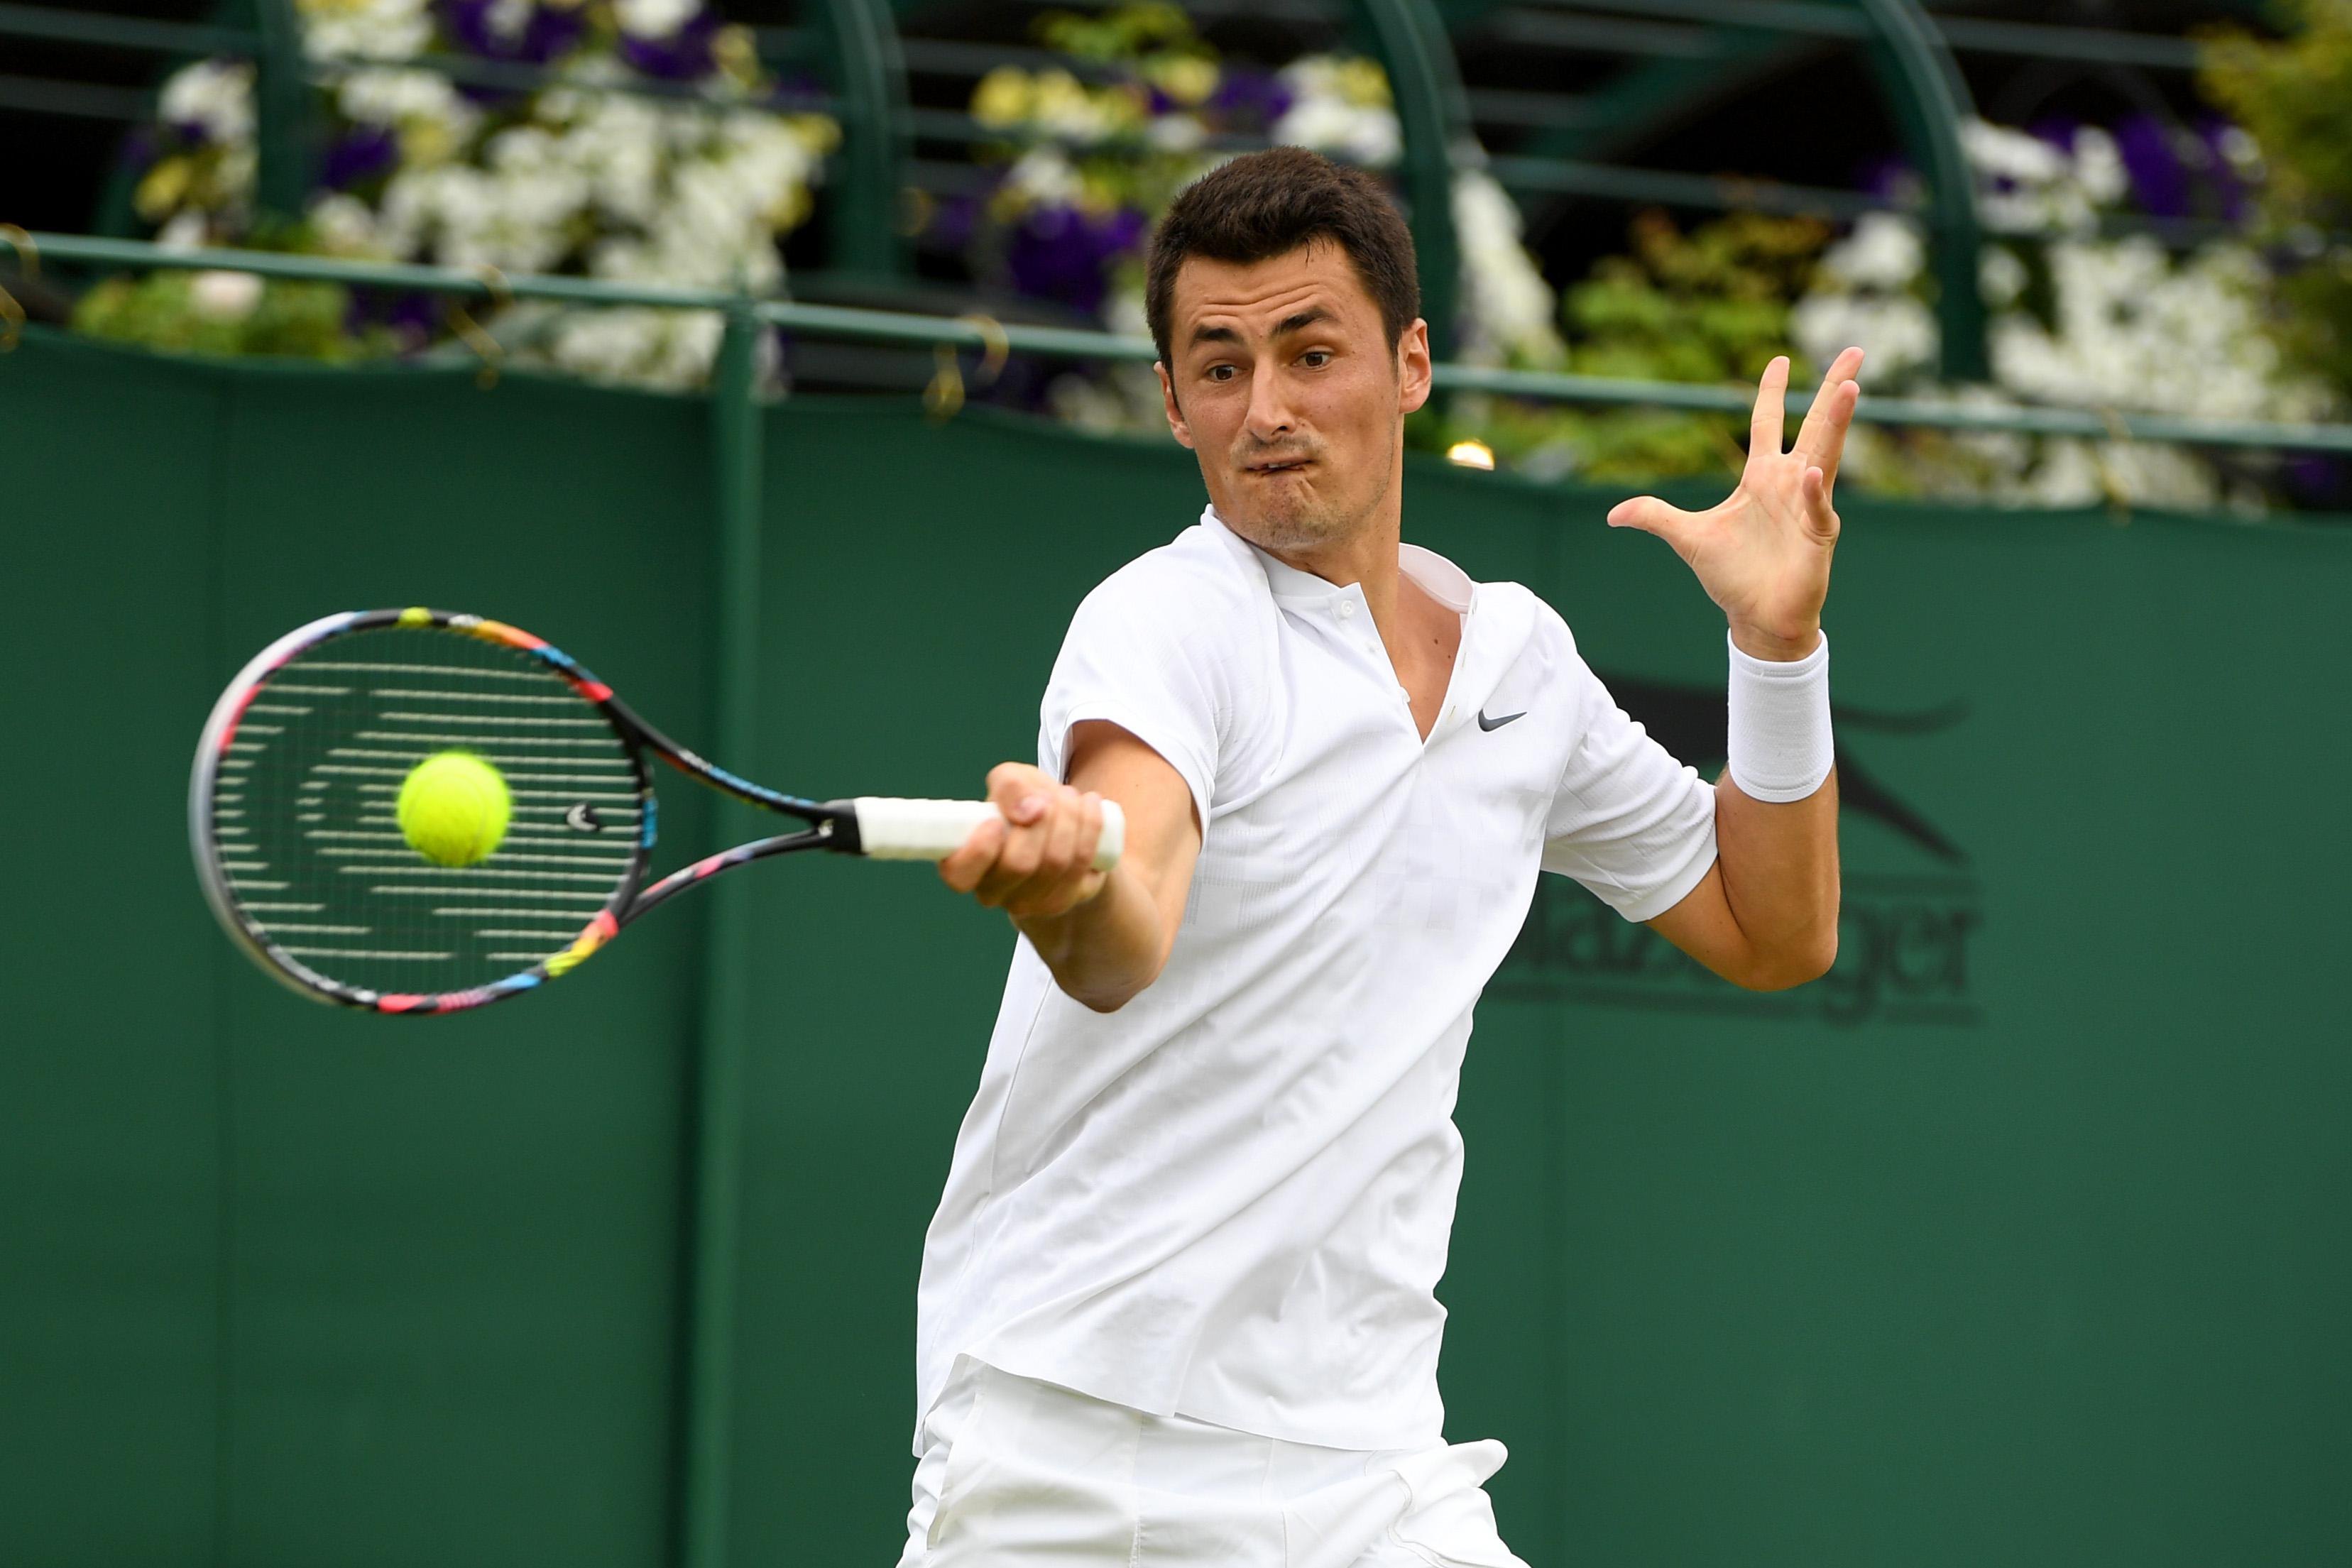 Bernard Tomic of Australia plays a forehand during the Gentlemen's Singles first round match against Mischa Zverev of Germany on day two of the Wimbledon Lawn Tennis Championships on July 4, 2017 in London, England. (David Ramos—Getty Images)